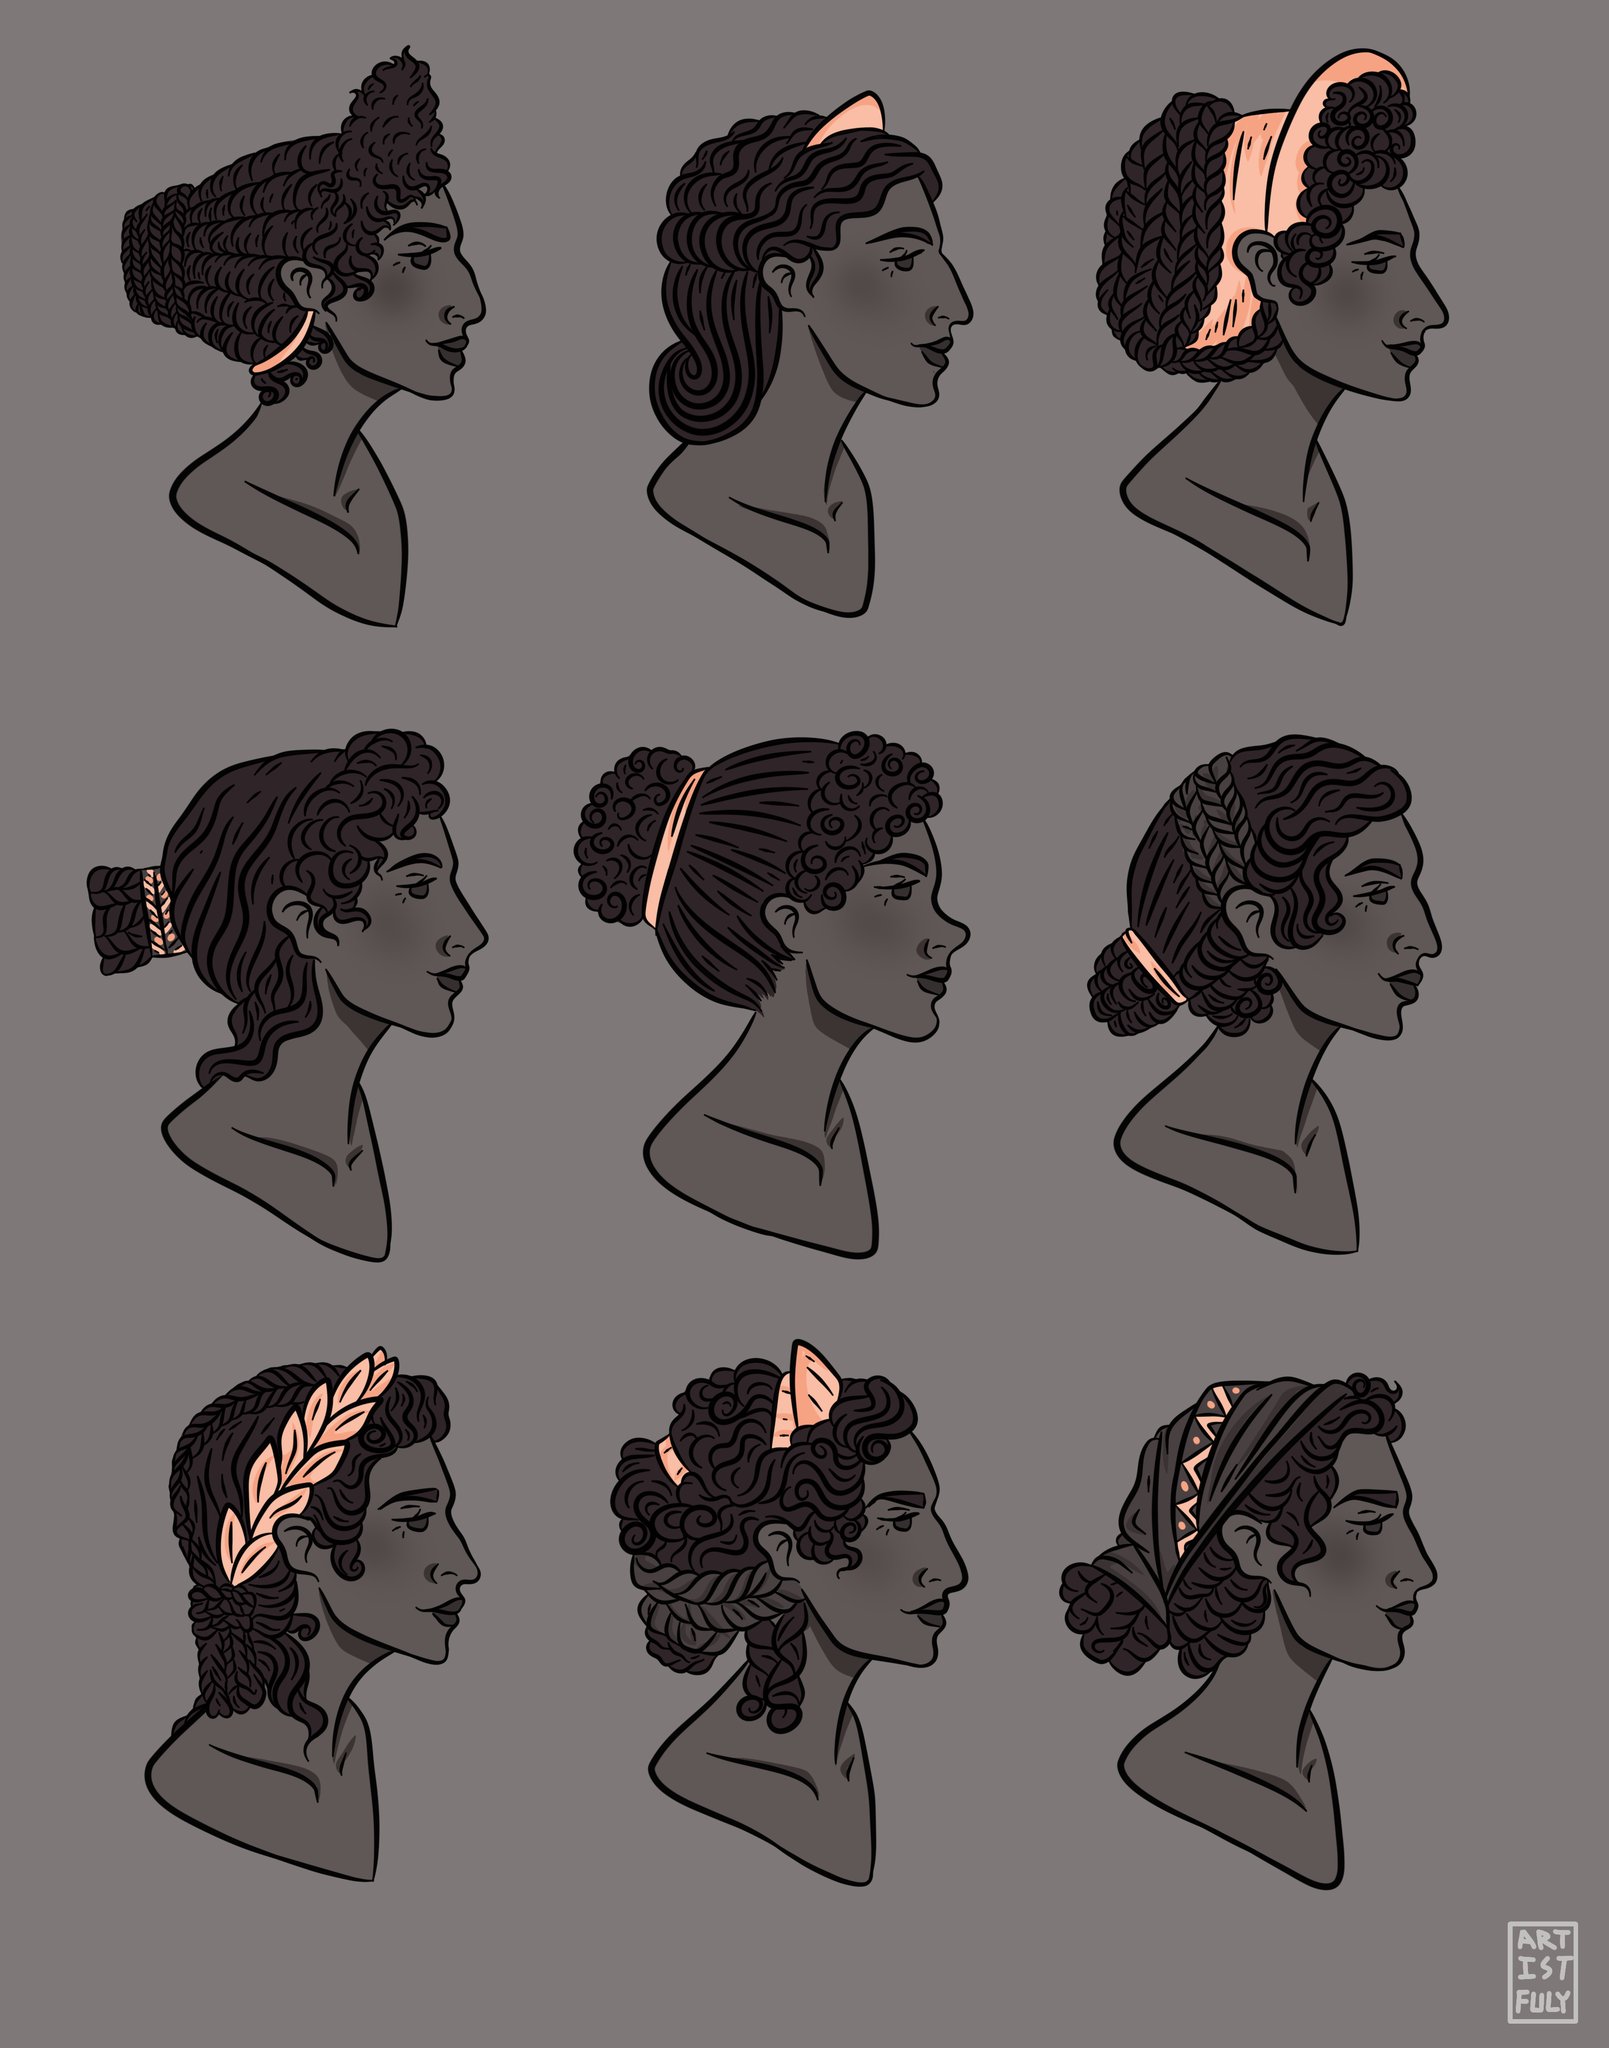 Women in ancient Rome sewed their hair. | Always Learning!